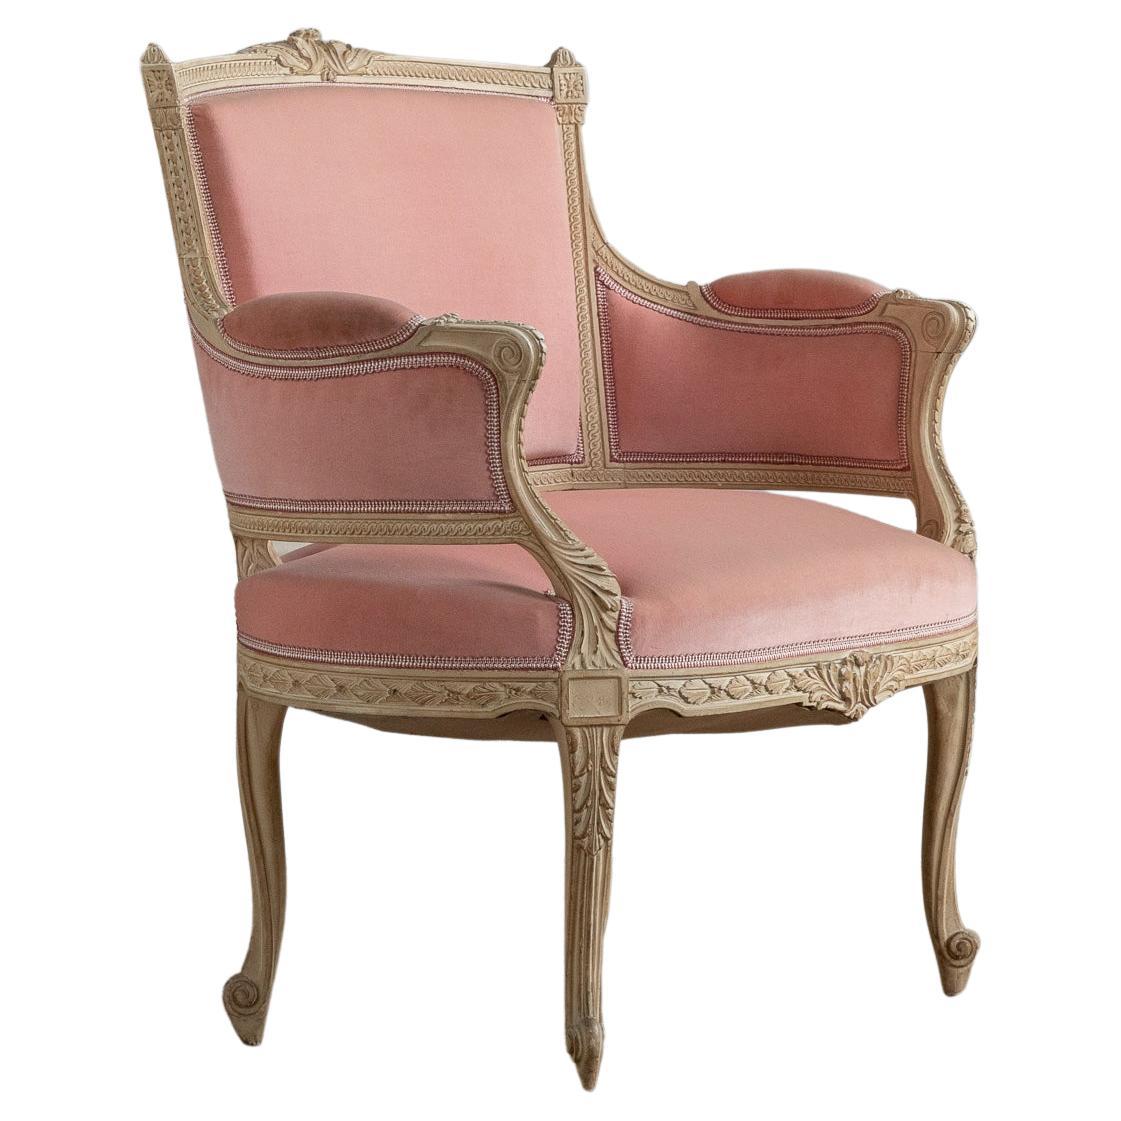 A transition Louis XV- Louis XVI Style Marquise hand carved in Beech and Hand painted in a cream lacquer.
Upholstered with a Pink velvet 
Very fine carving all around.